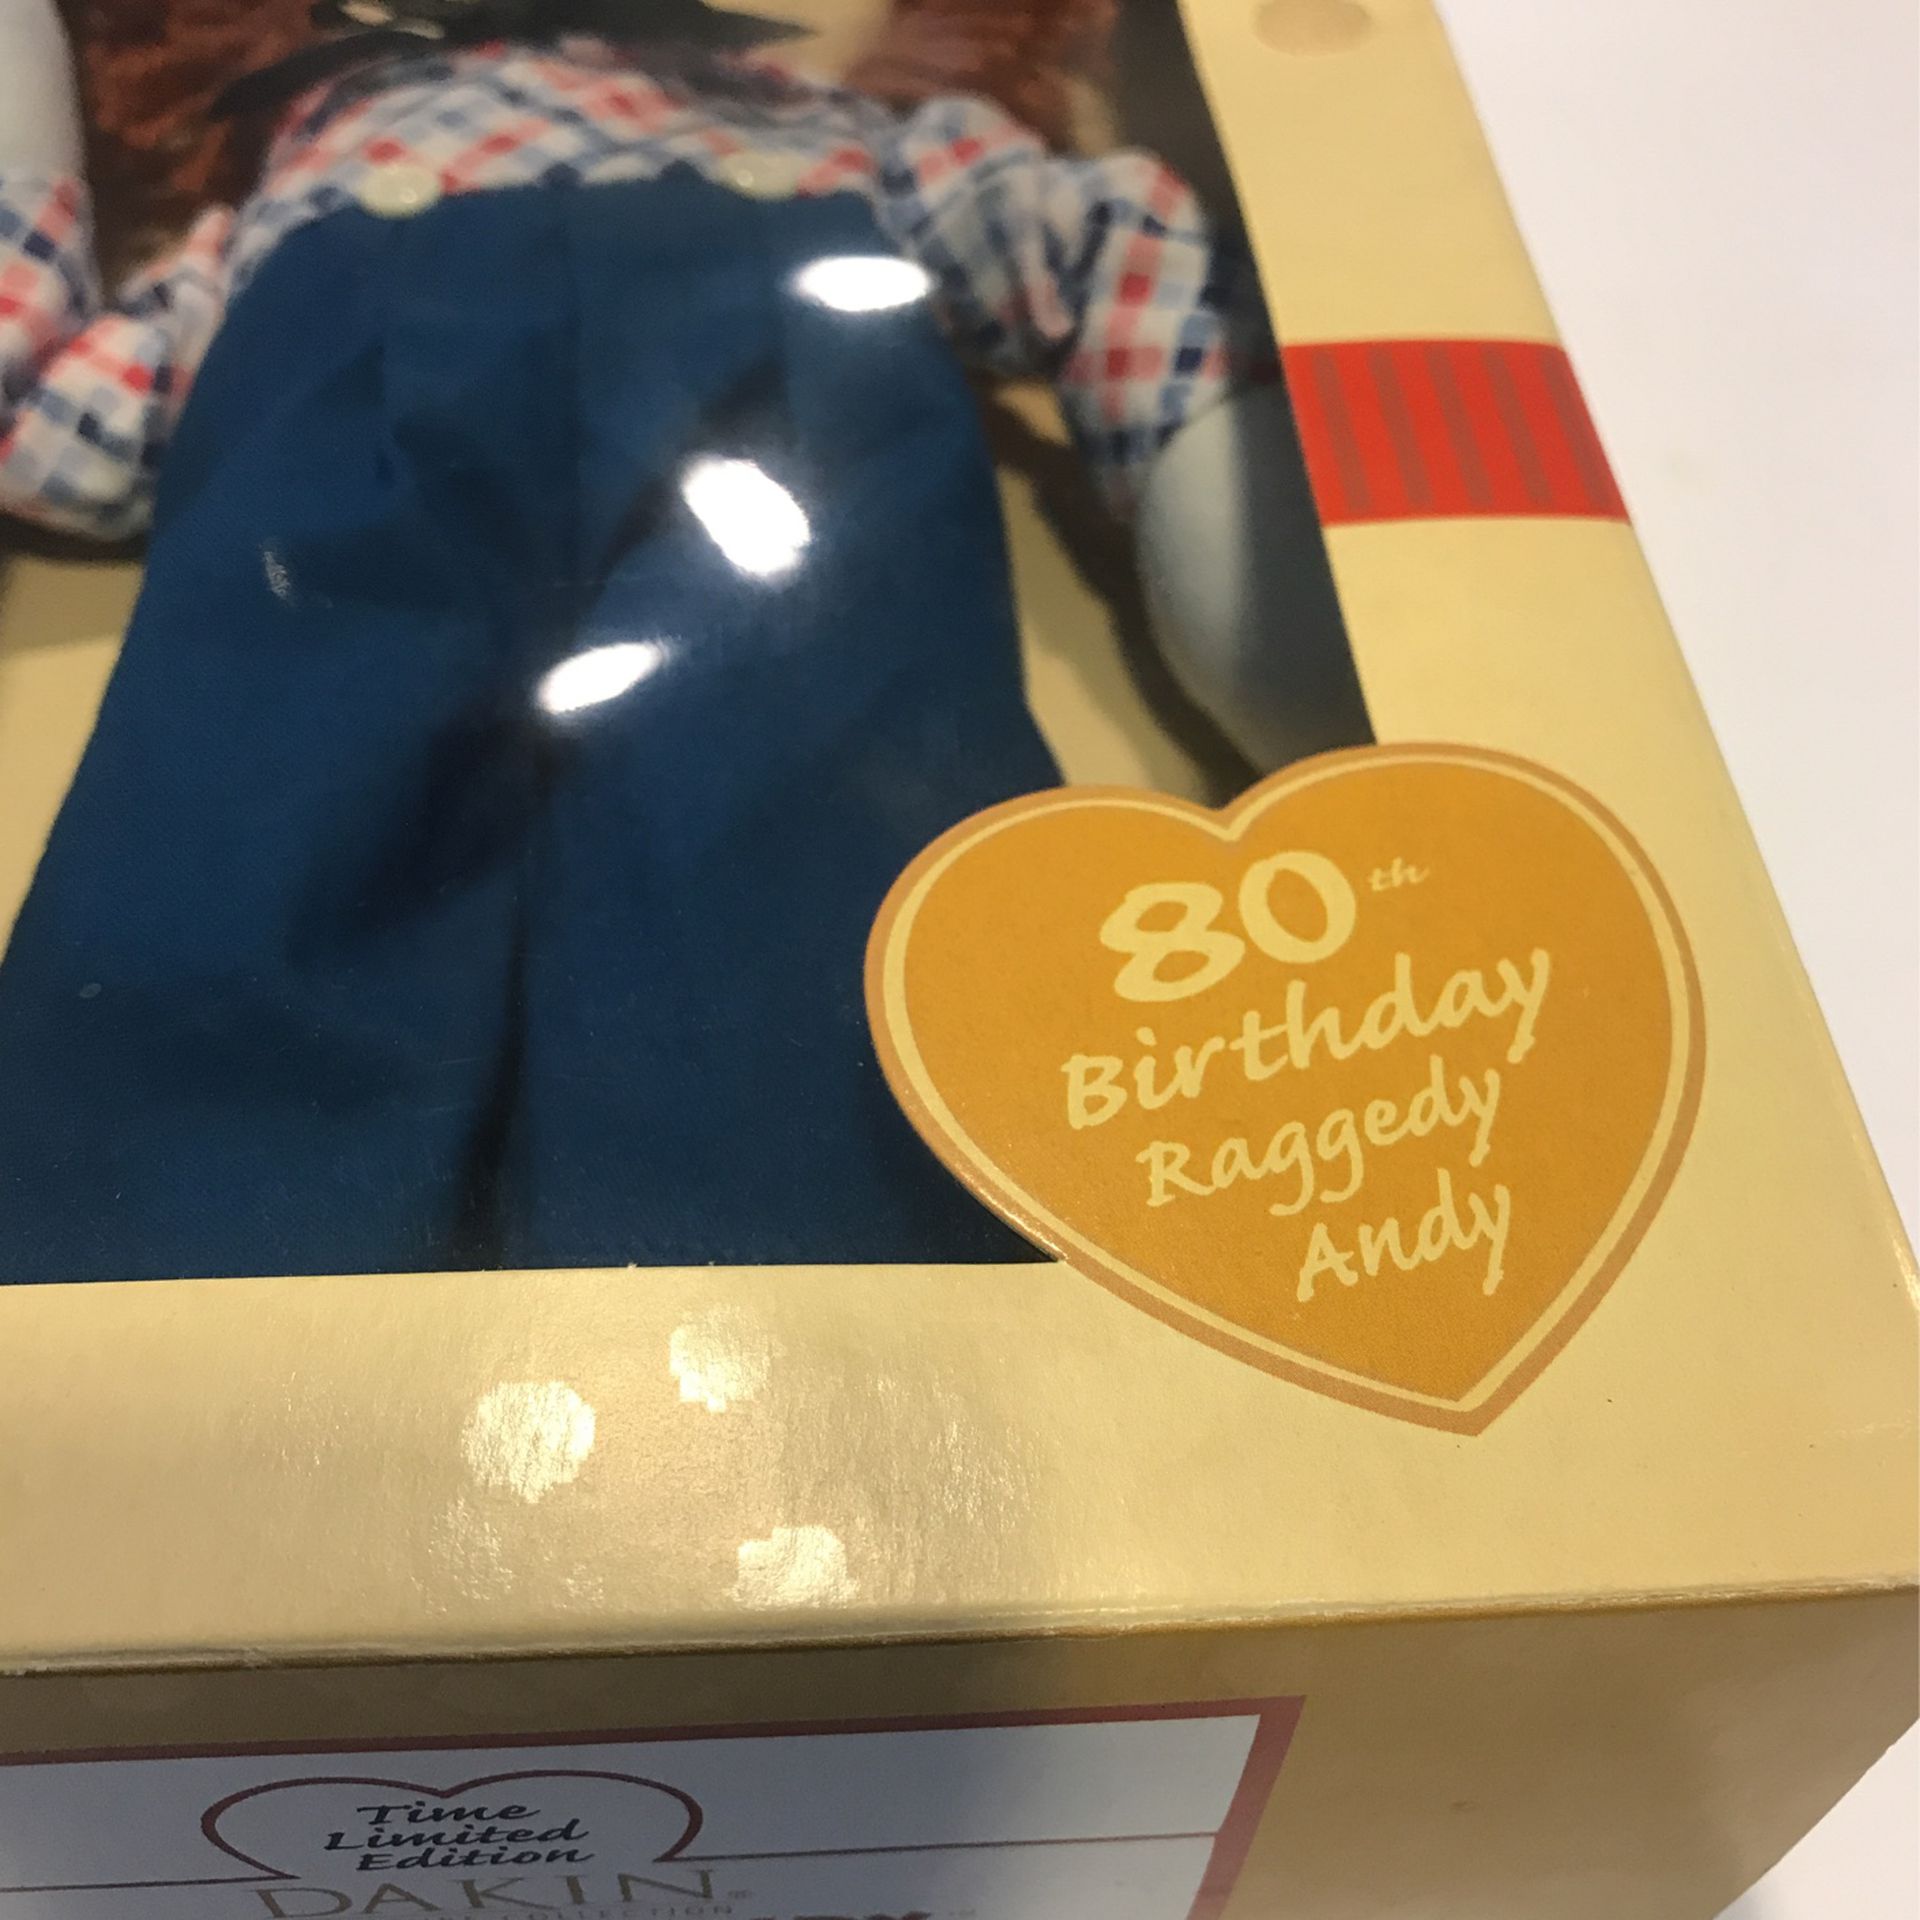 Dakin 12" RAGGEDY ANDY Doll 80th Birthday/ Commemorative Time Limited Edition/ Signature Collection